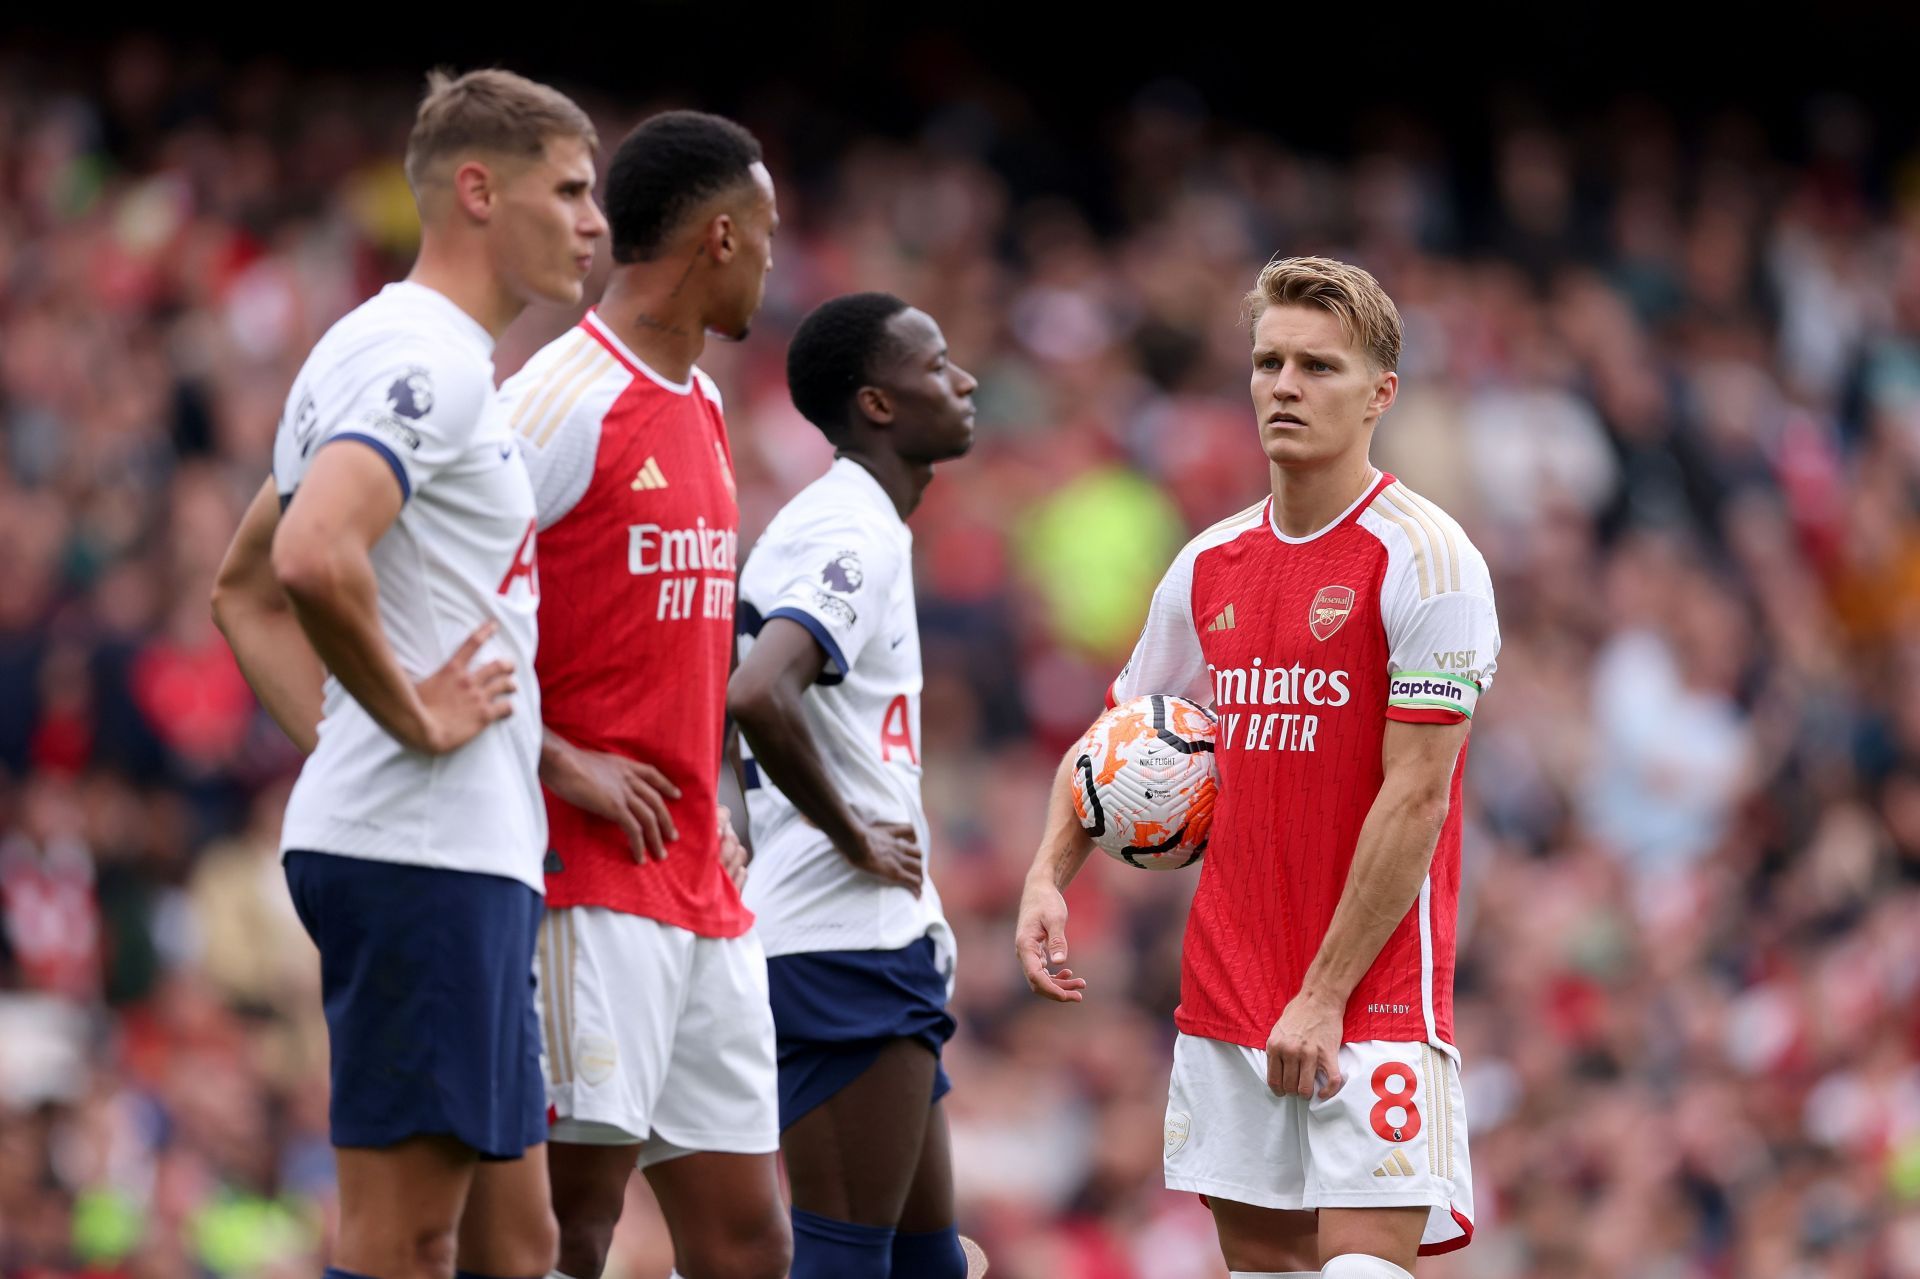 Arsenal struggled to impress in the north London derby.